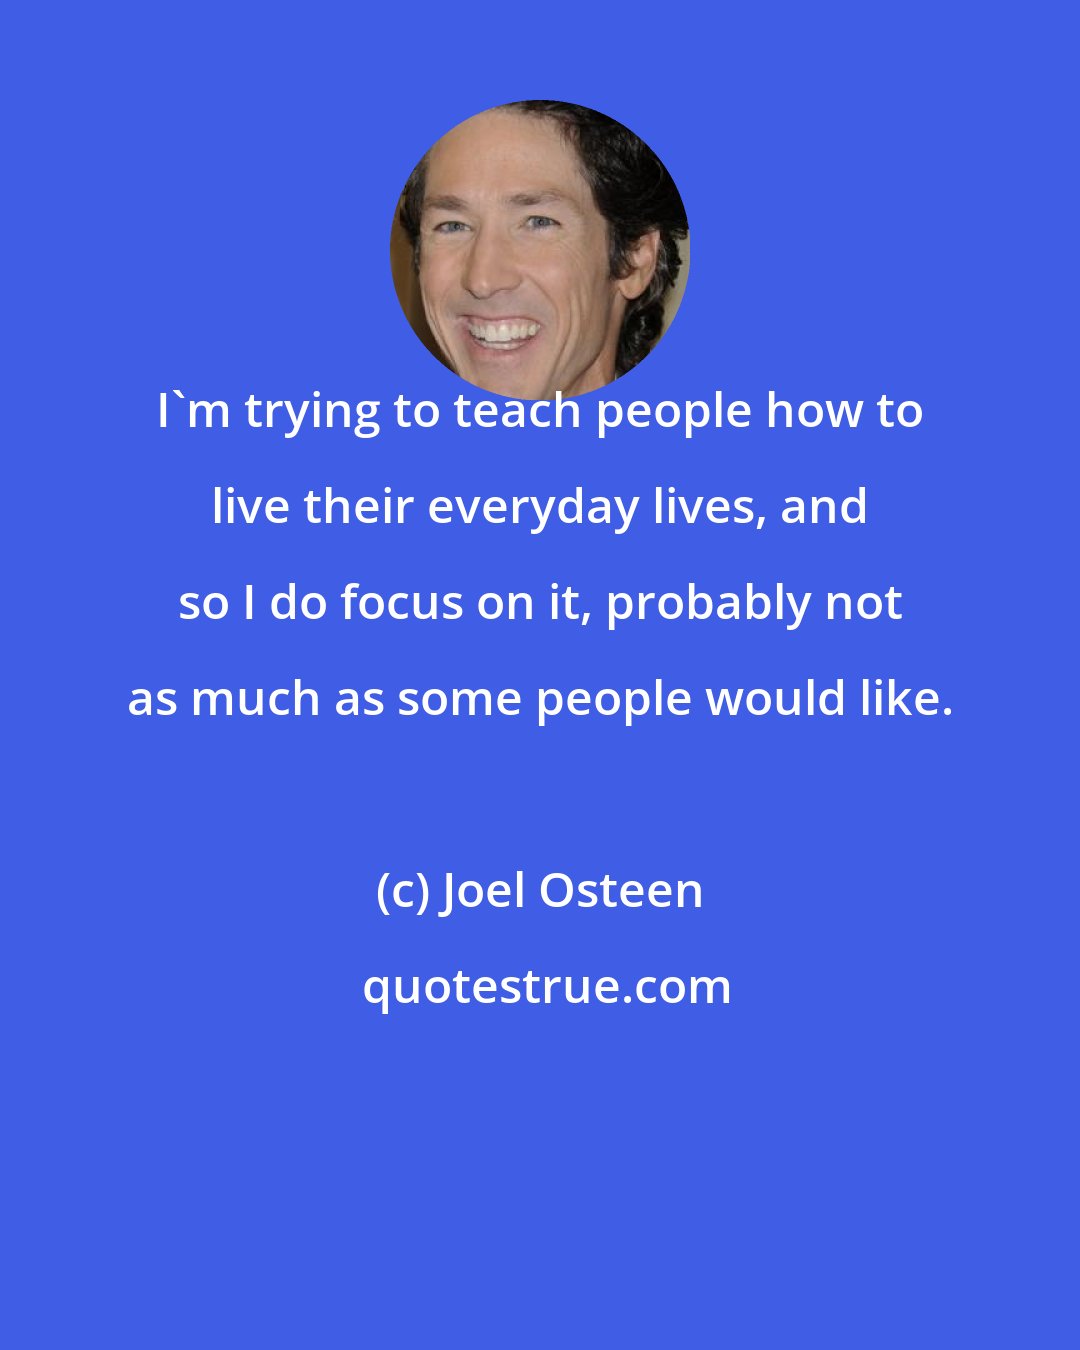 Joel Osteen: I'm trying to teach people how to live their everyday lives, and so I do focus on it, probably not as much as some people would like.